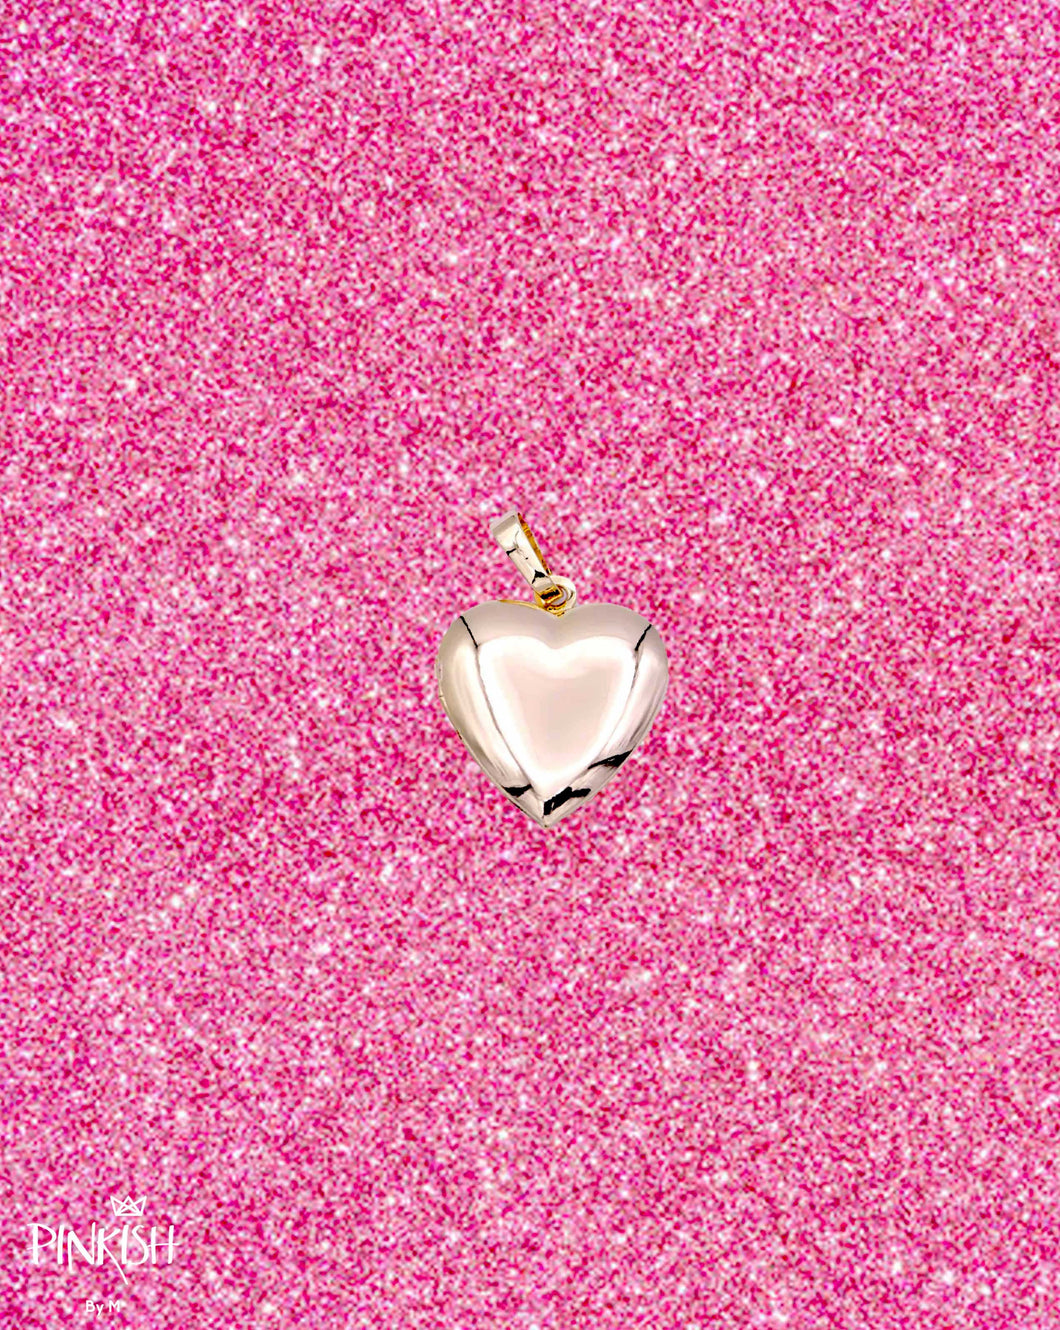 My Heart for you Locket Necklace